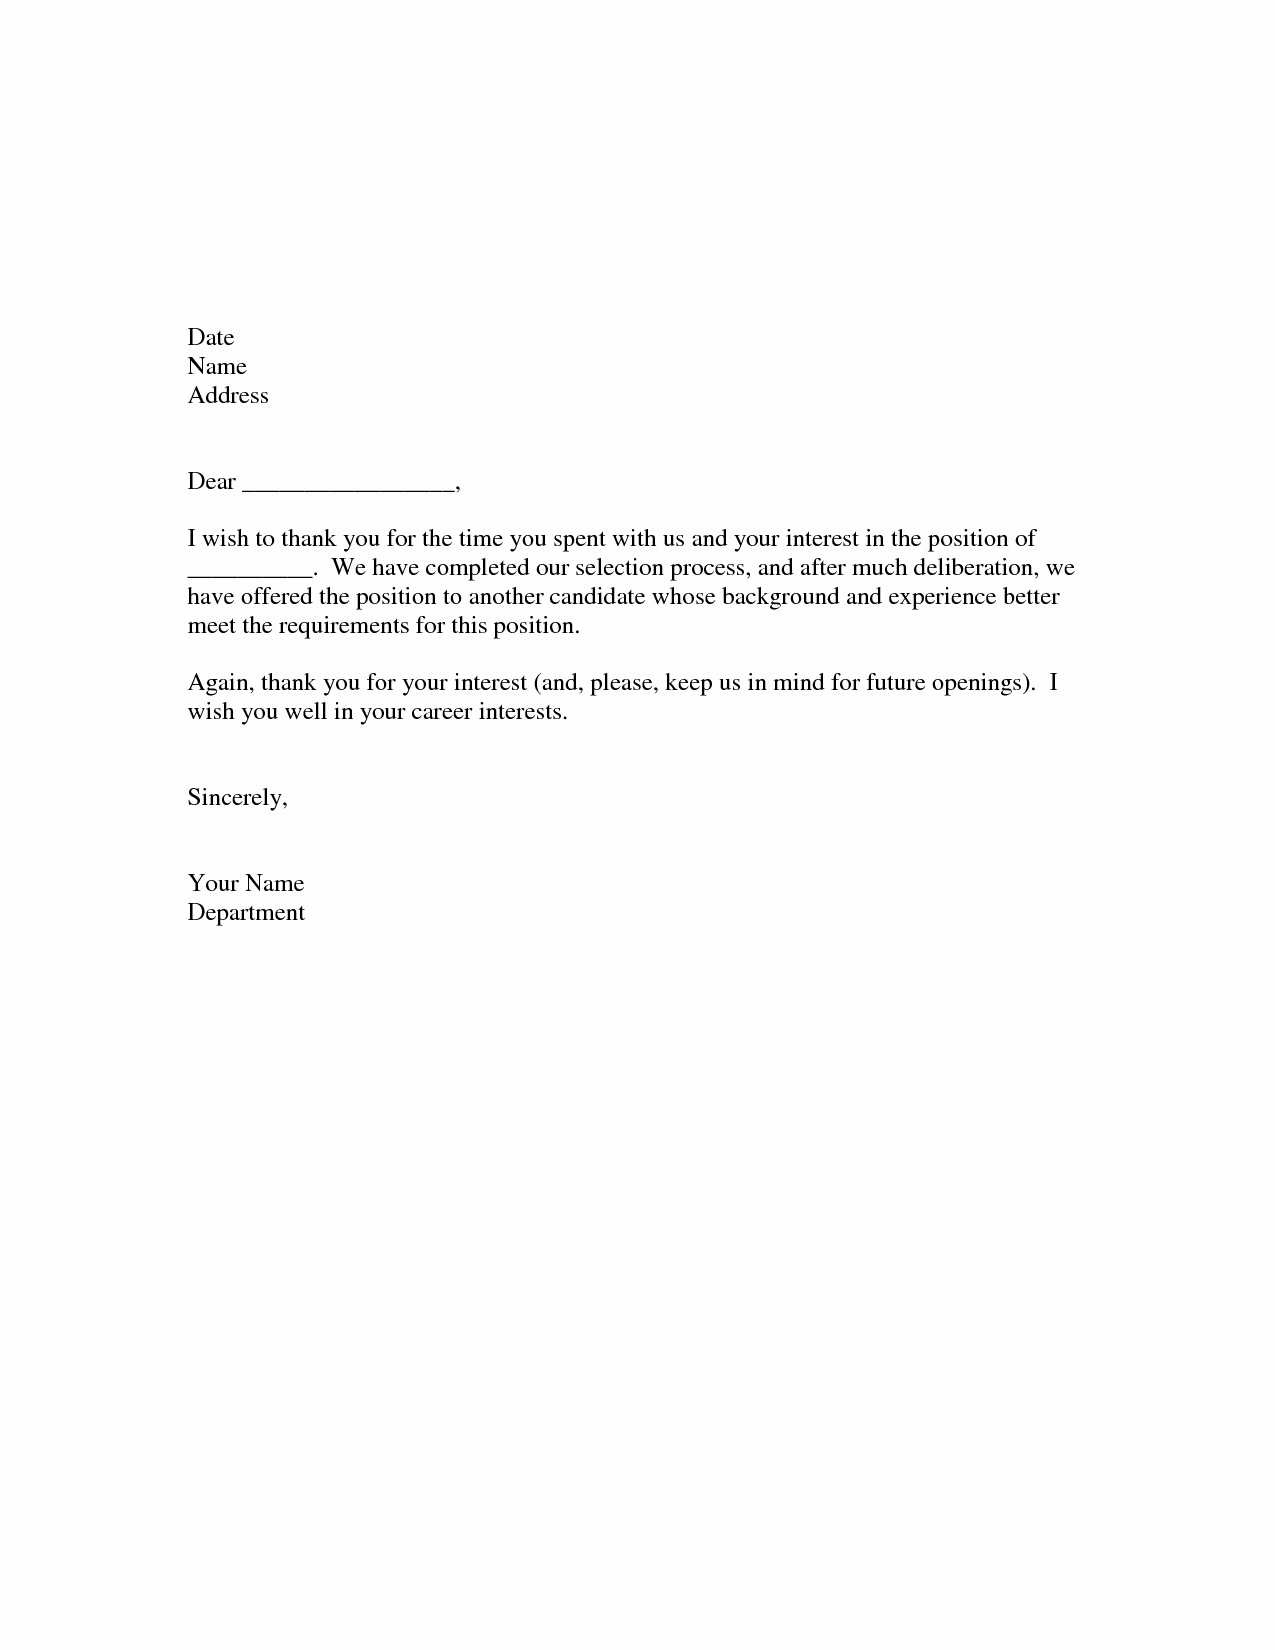 Request for Proposal Rejection Letter Luxury Best S Of Vendor Proposal Rejection Letter Rfp